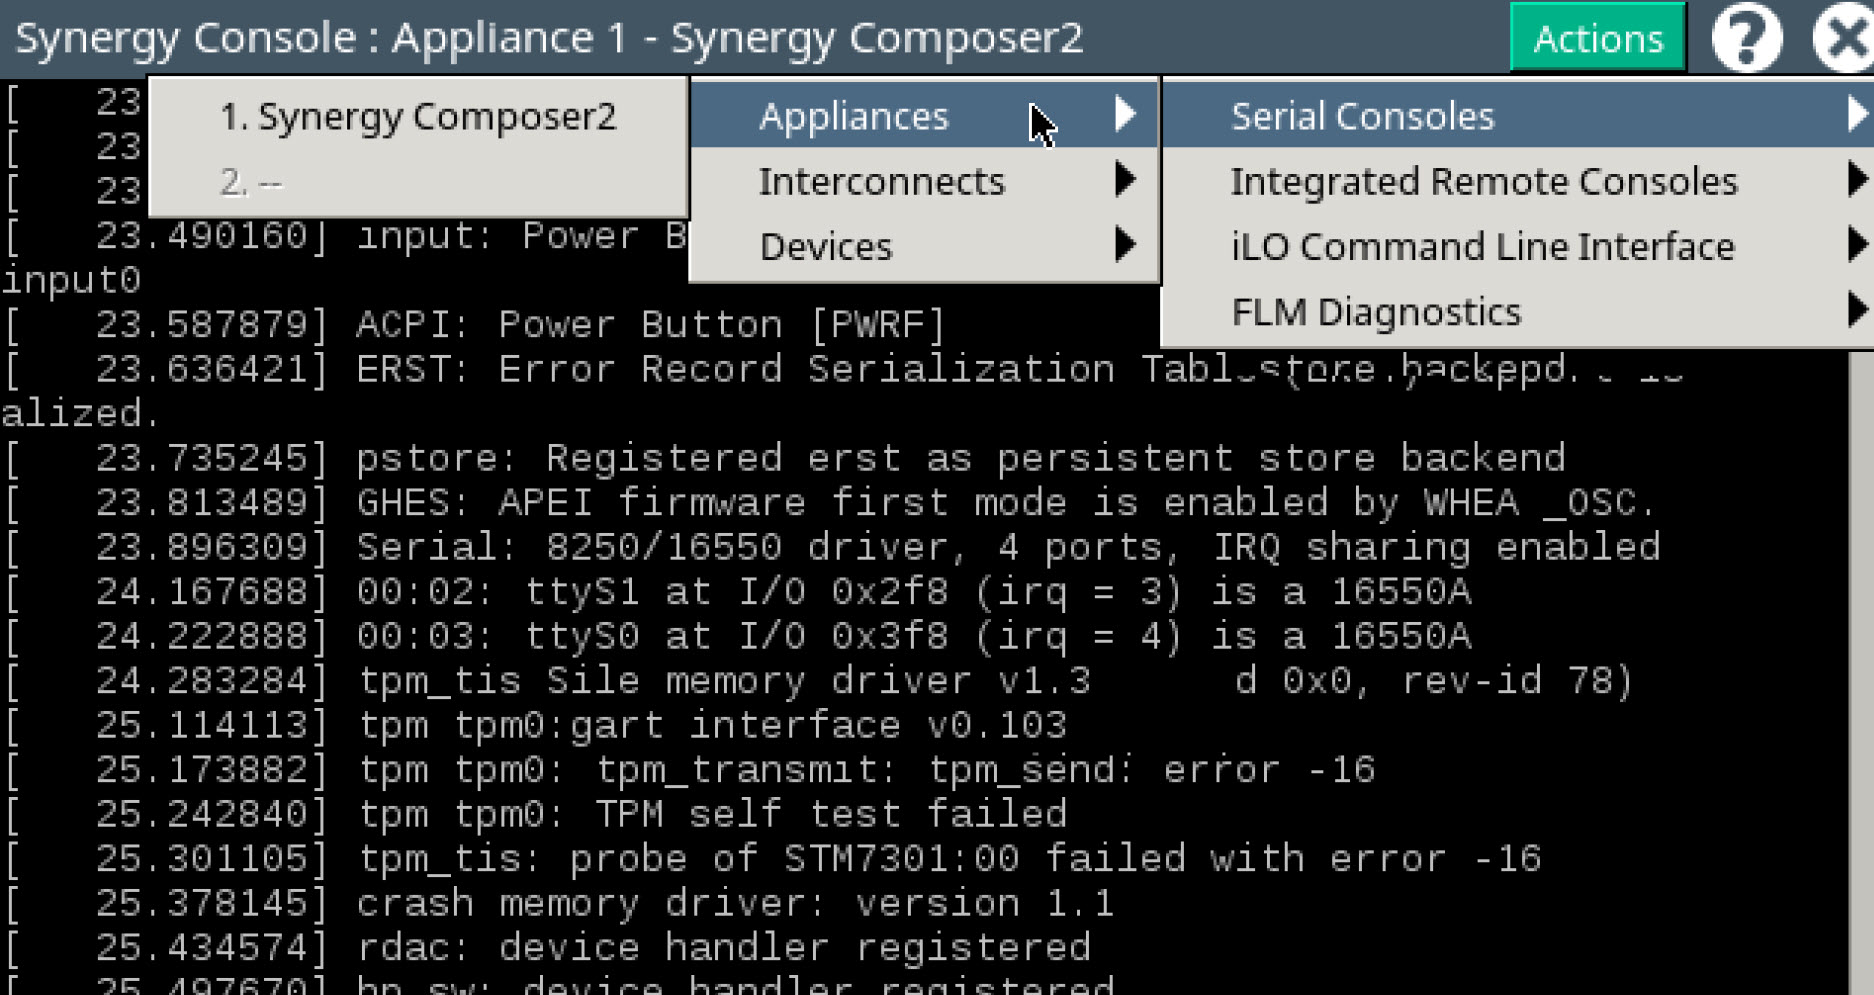 Connect to the appliance maintenance console